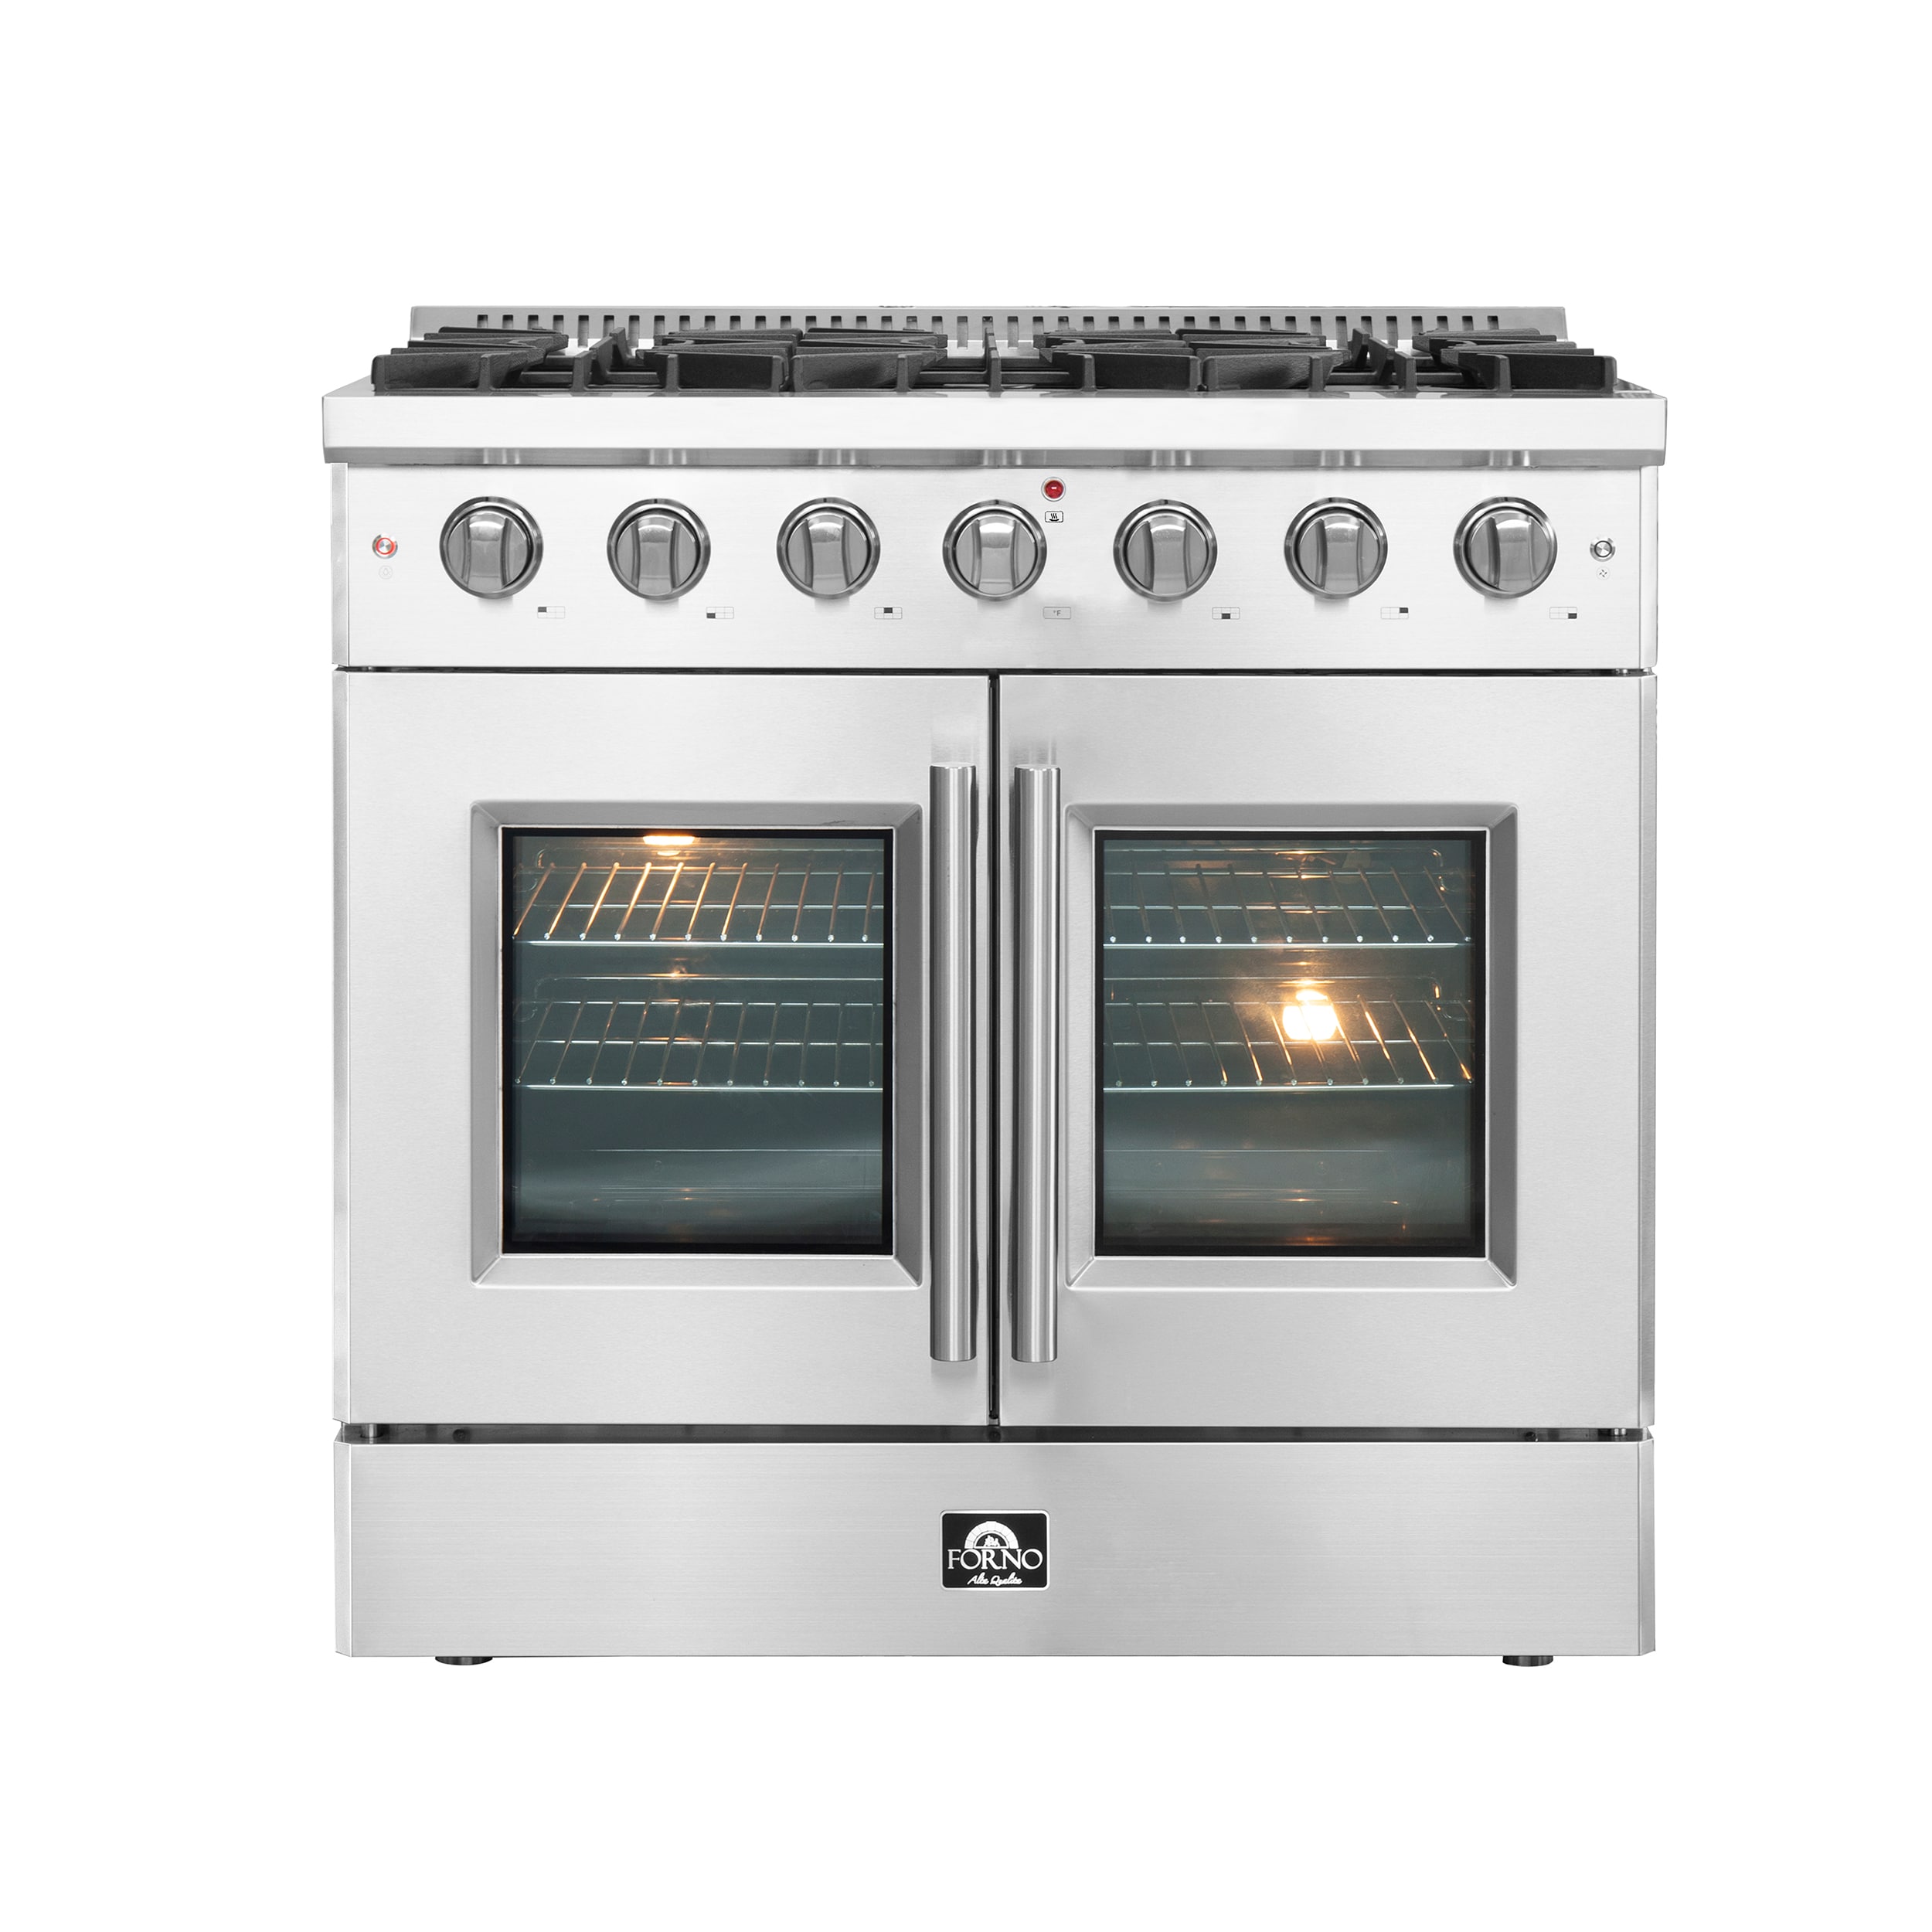 Vertical 6 burners electric stove with oven stainless steel body